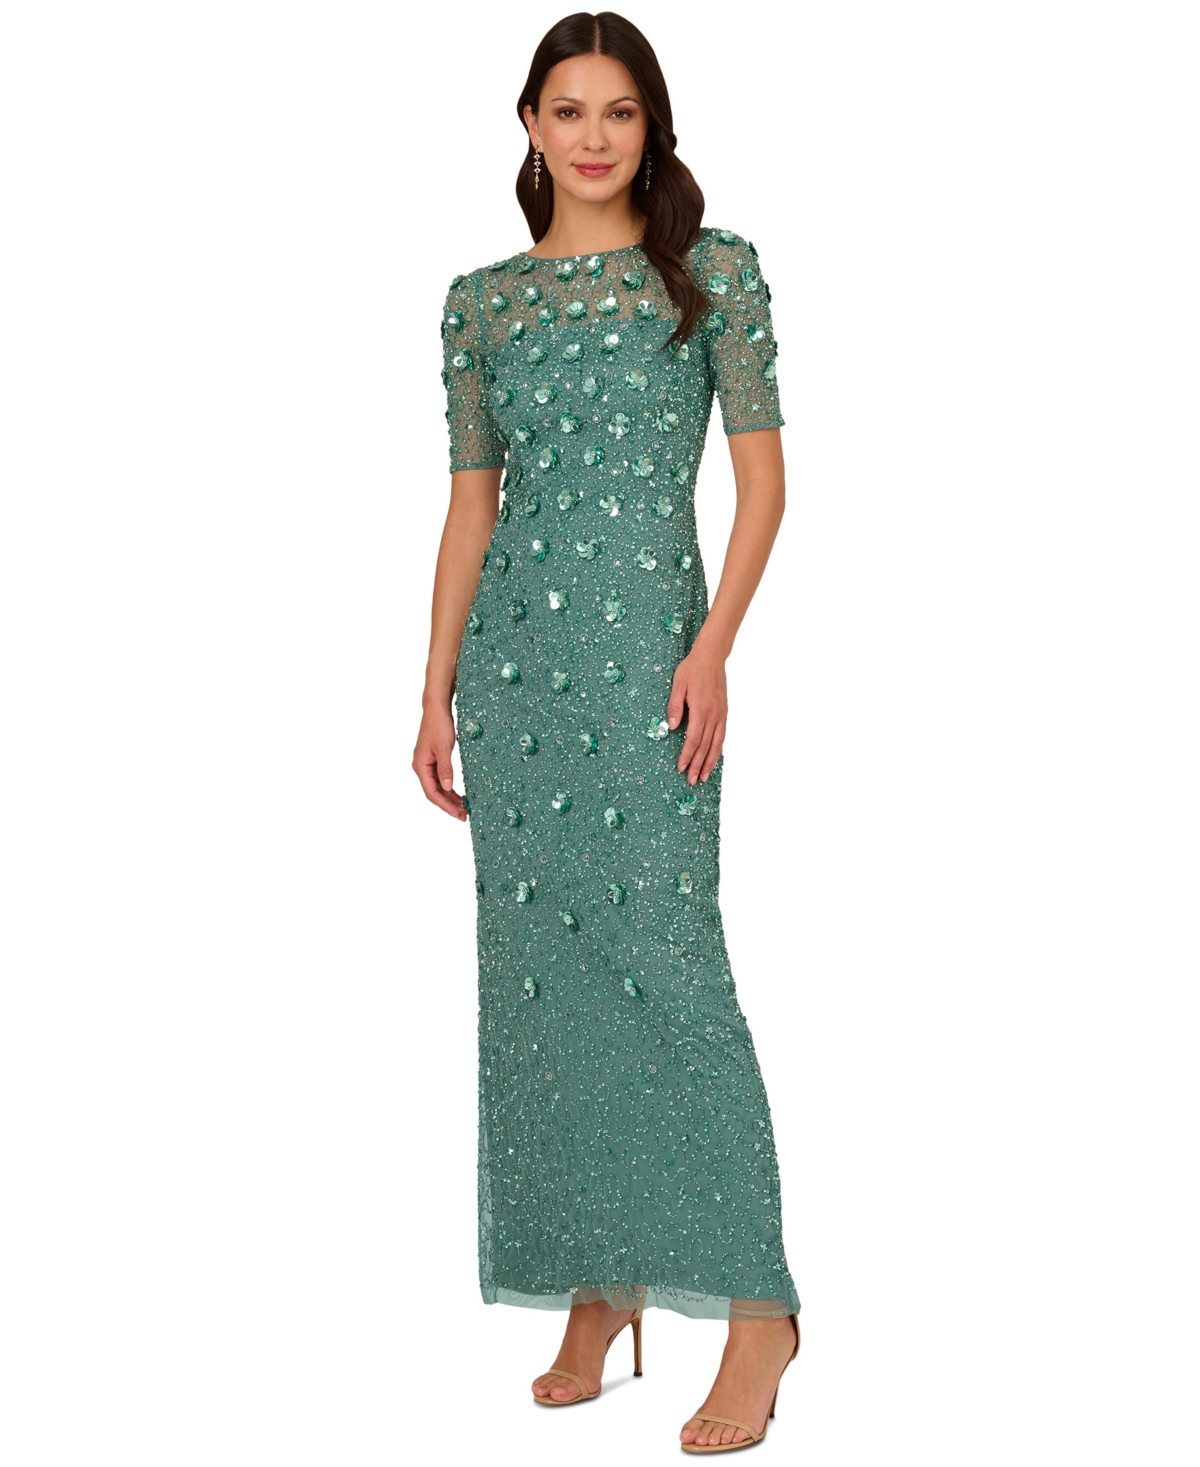 Adrianna Papell Embellished Floral Sheath Dress In Greenslate